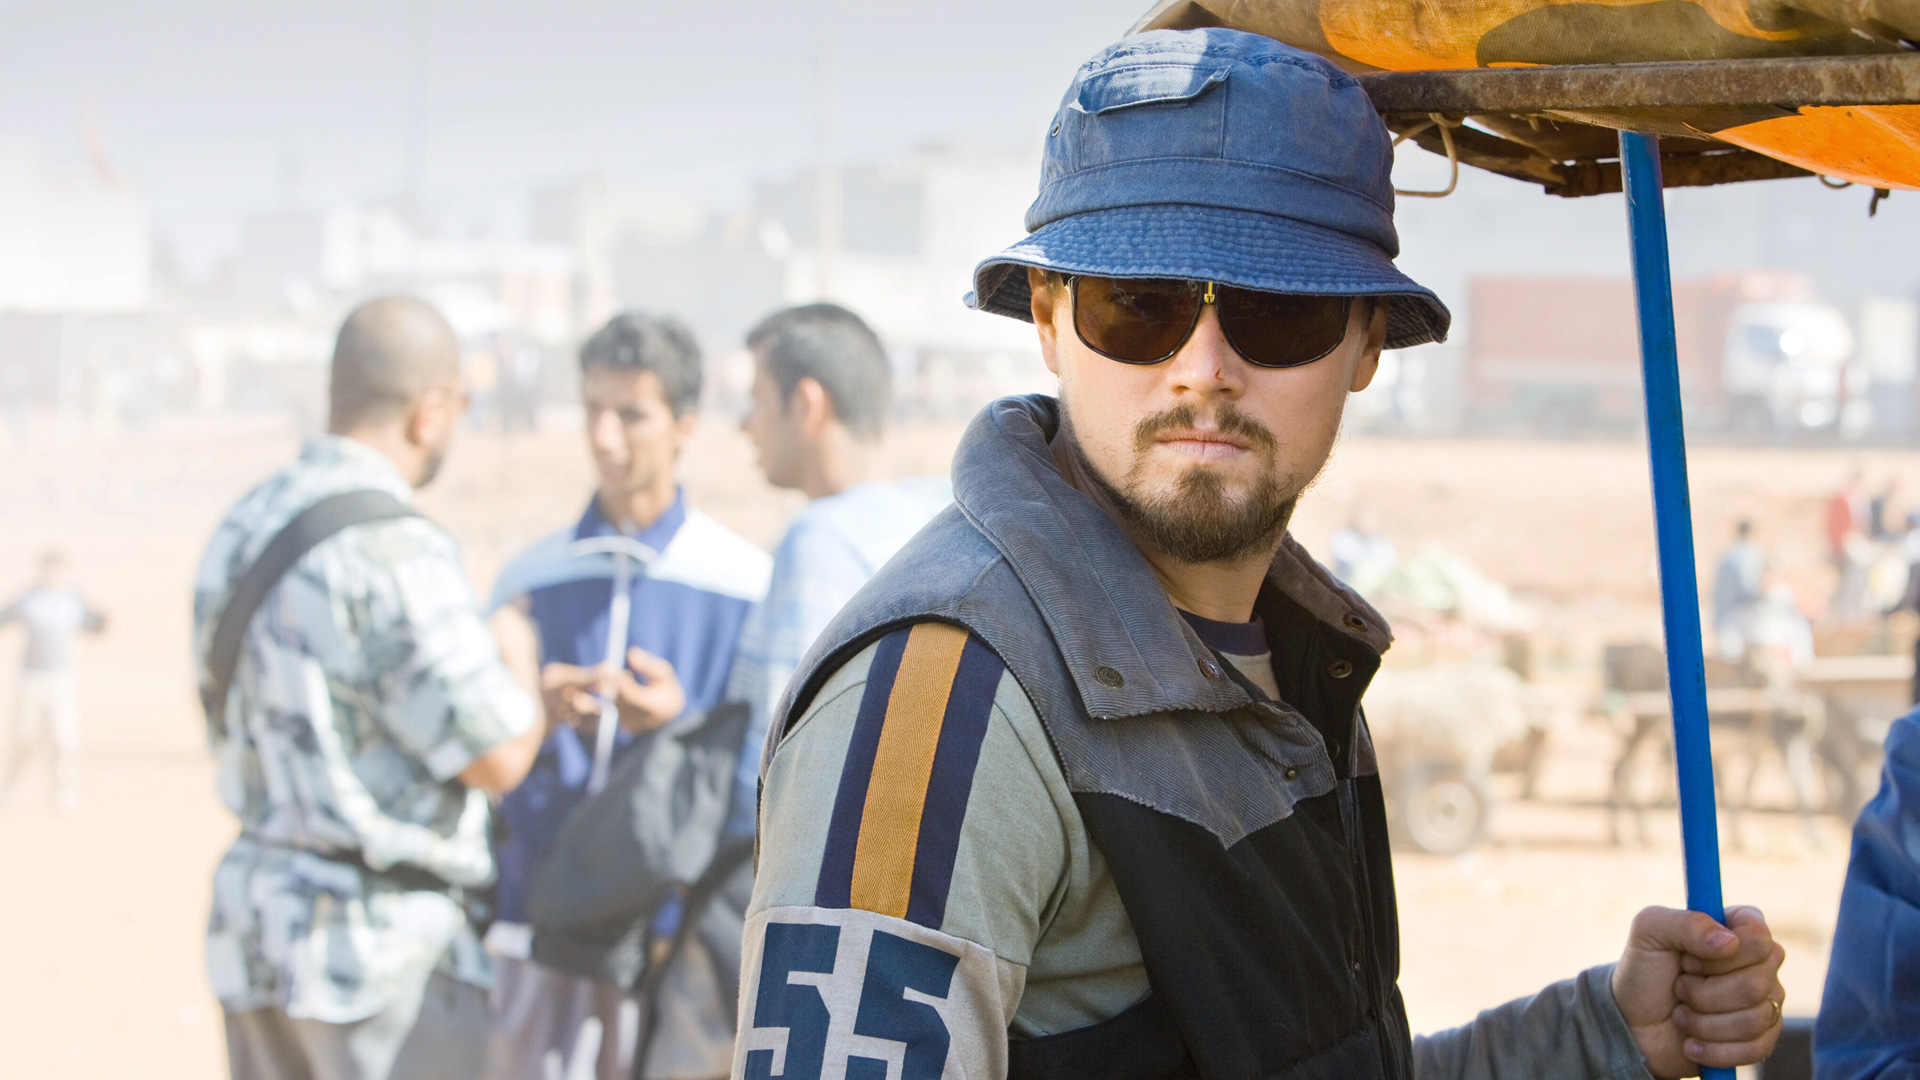 Body Of Lies Pics, Movie Collection